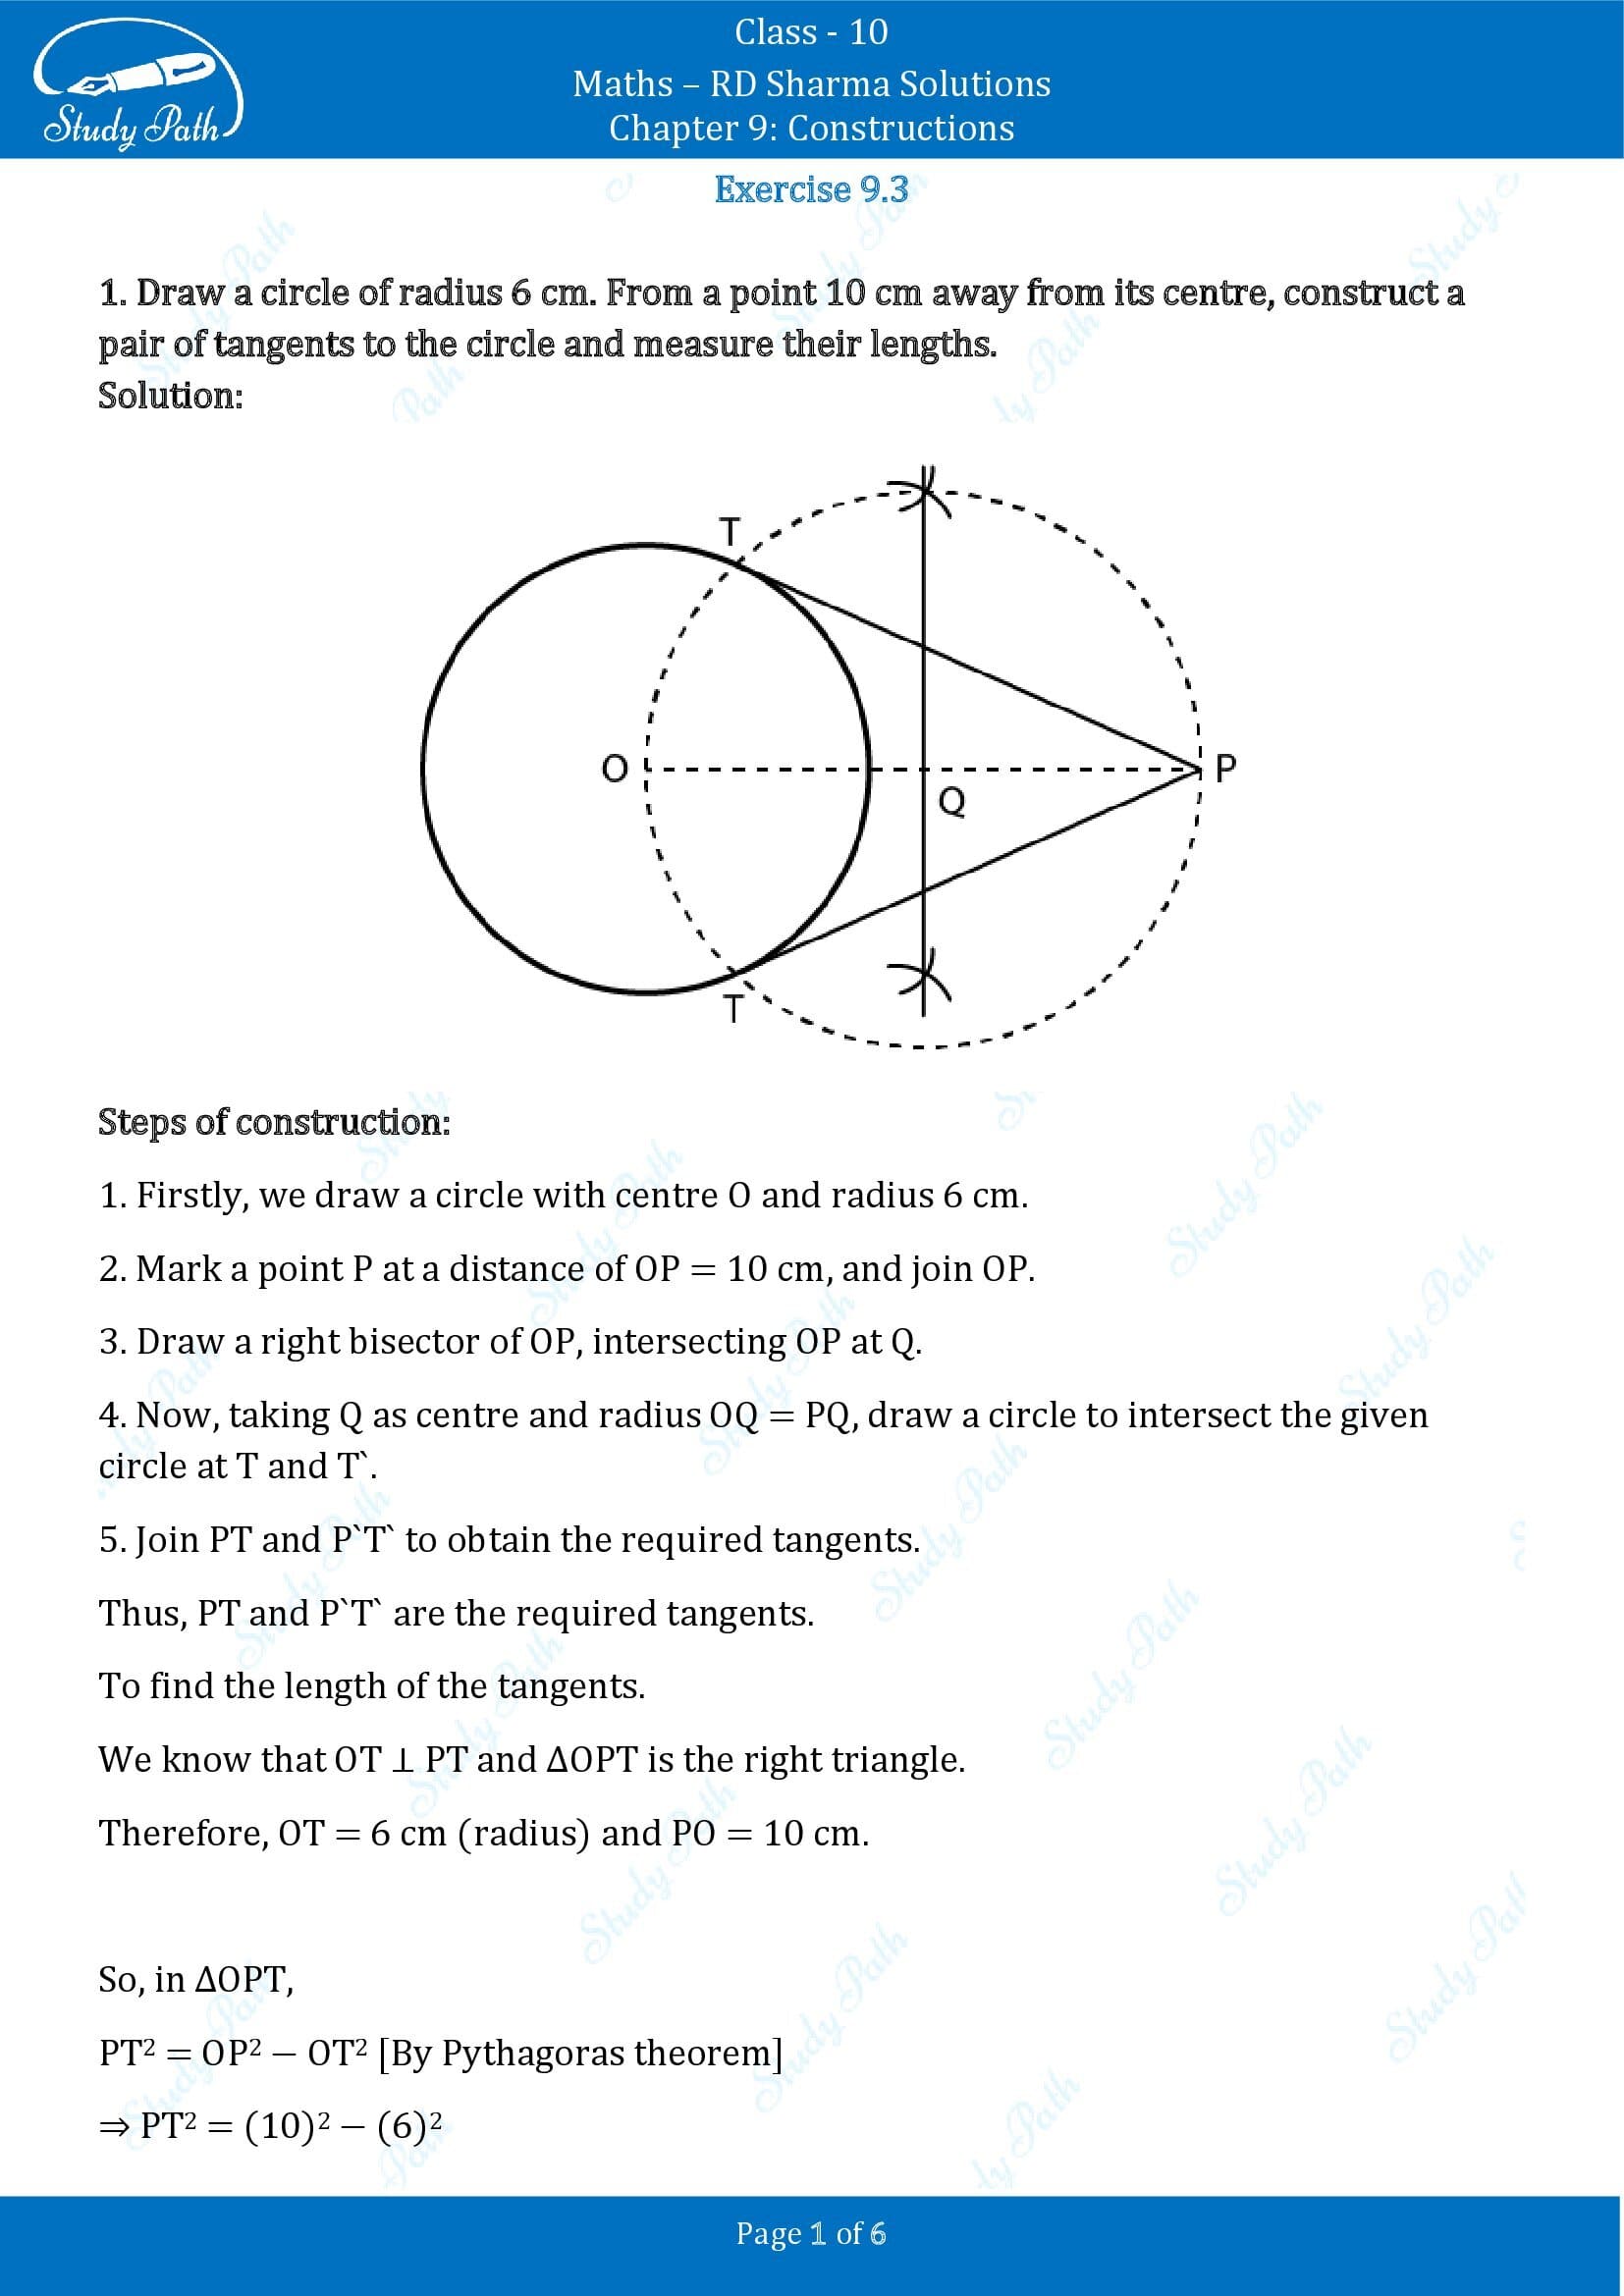 RD Sharma Solutions Class 10 Chapter 9 Constructions Exercise 9.3 00001